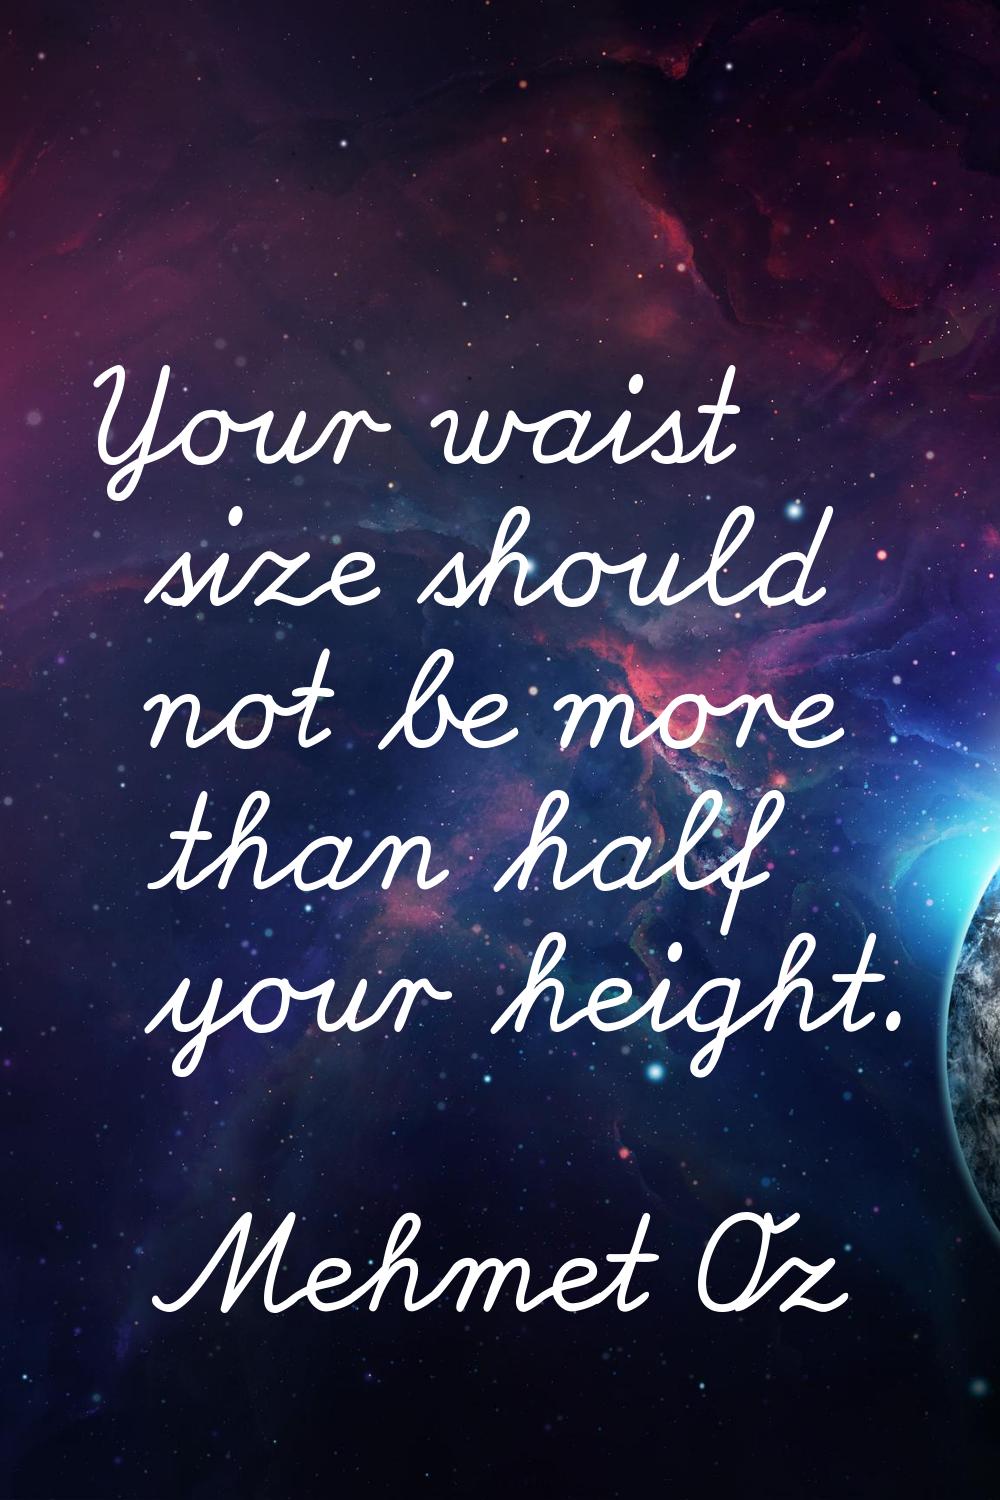 Your waist size should not be more than half your height.